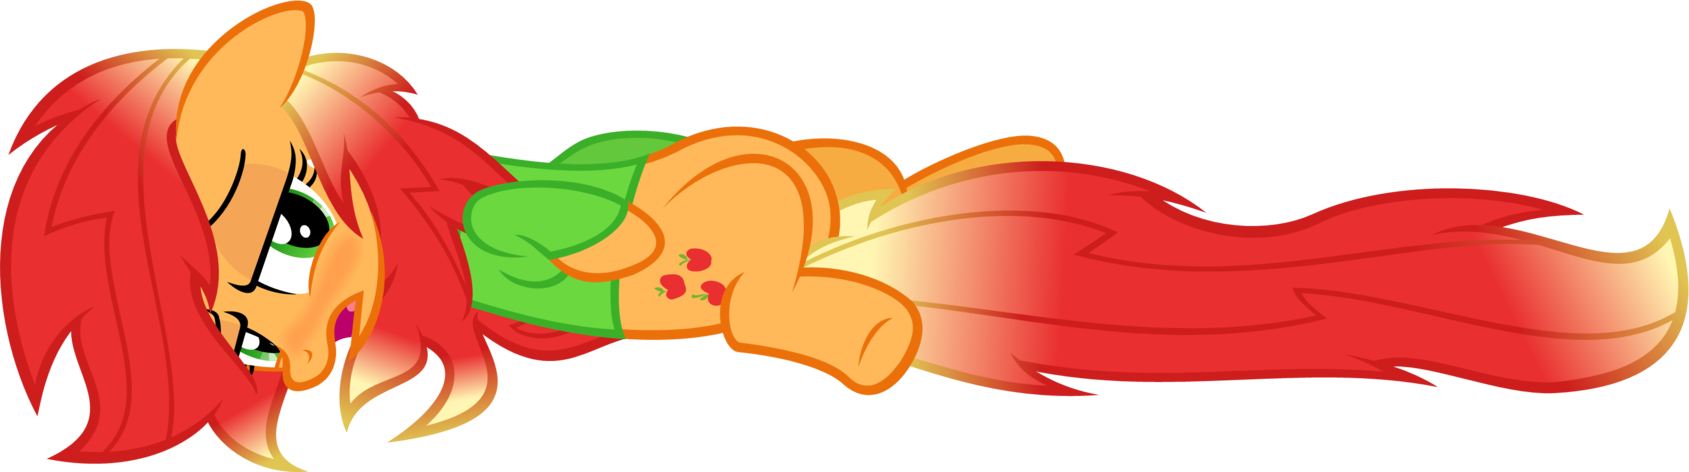 You Can Click Above To Reveal The Image Just This Once, - Applejack Rough Morning (1689x472)